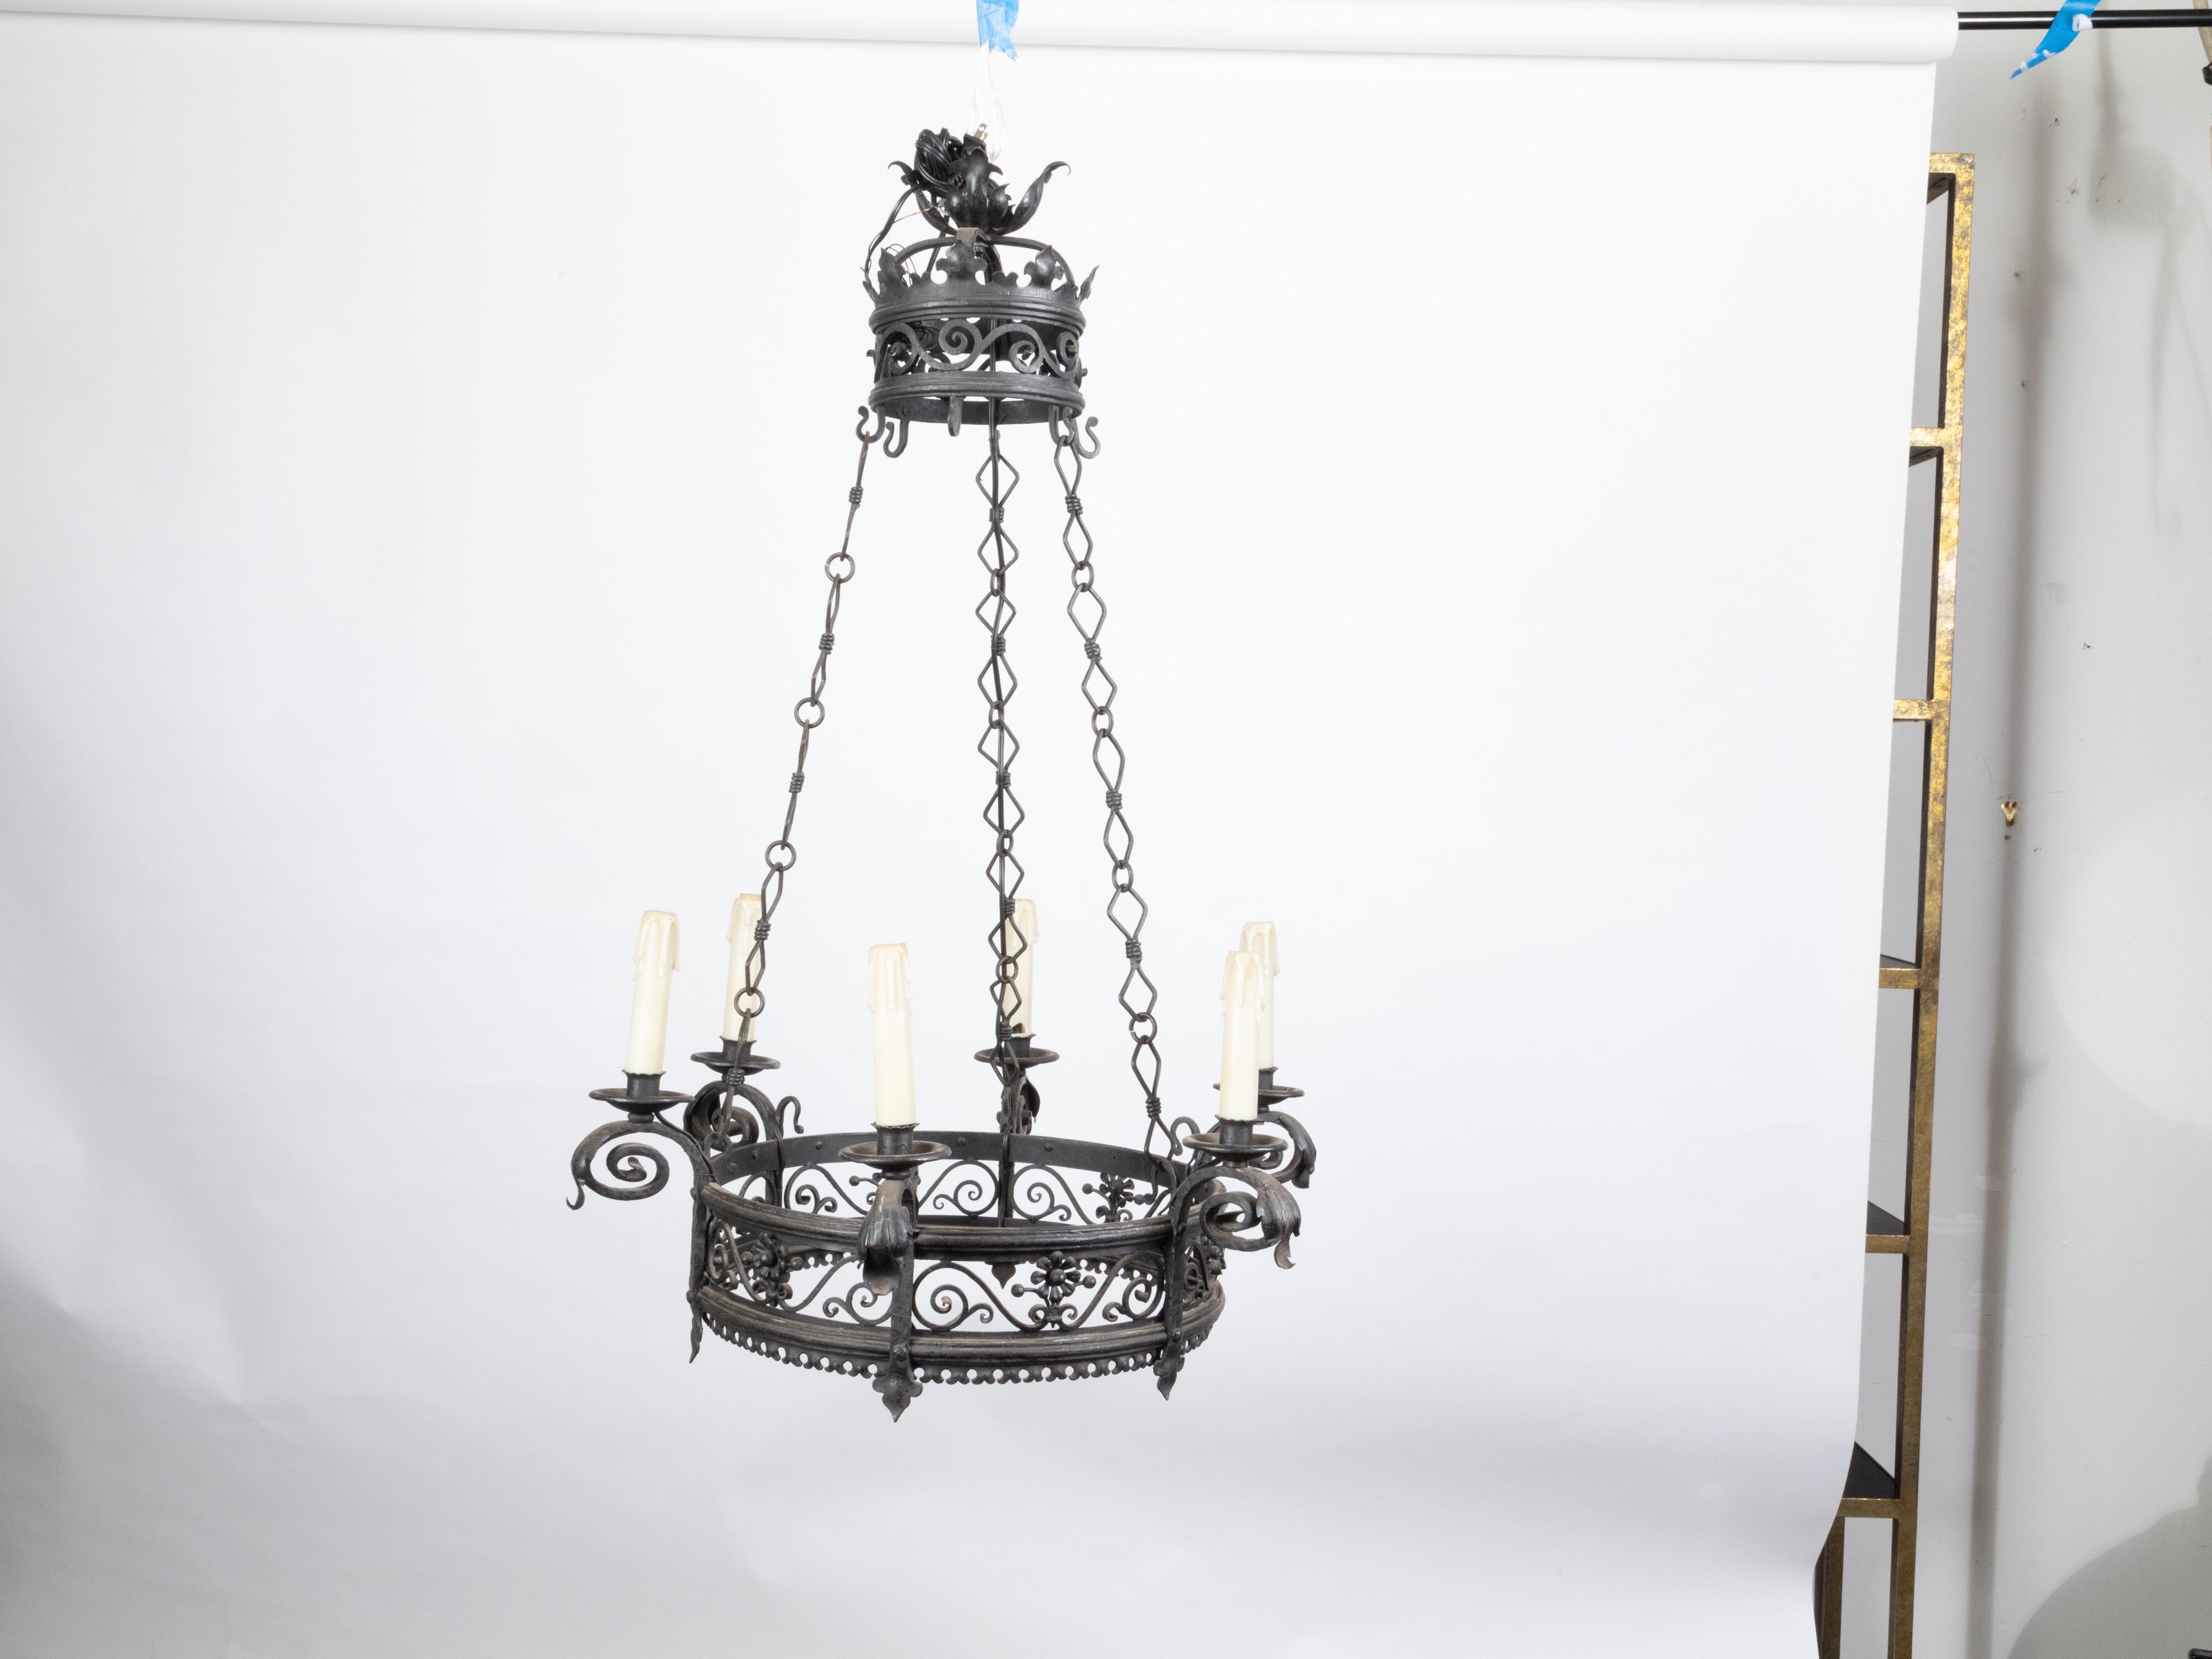 A French iron chandelier from the turn of the century, with six lights and scrollwork motifs. Created in France during the early years of the 20th century, this iron chandelier attracts the attention with its two rings of increasing size, each